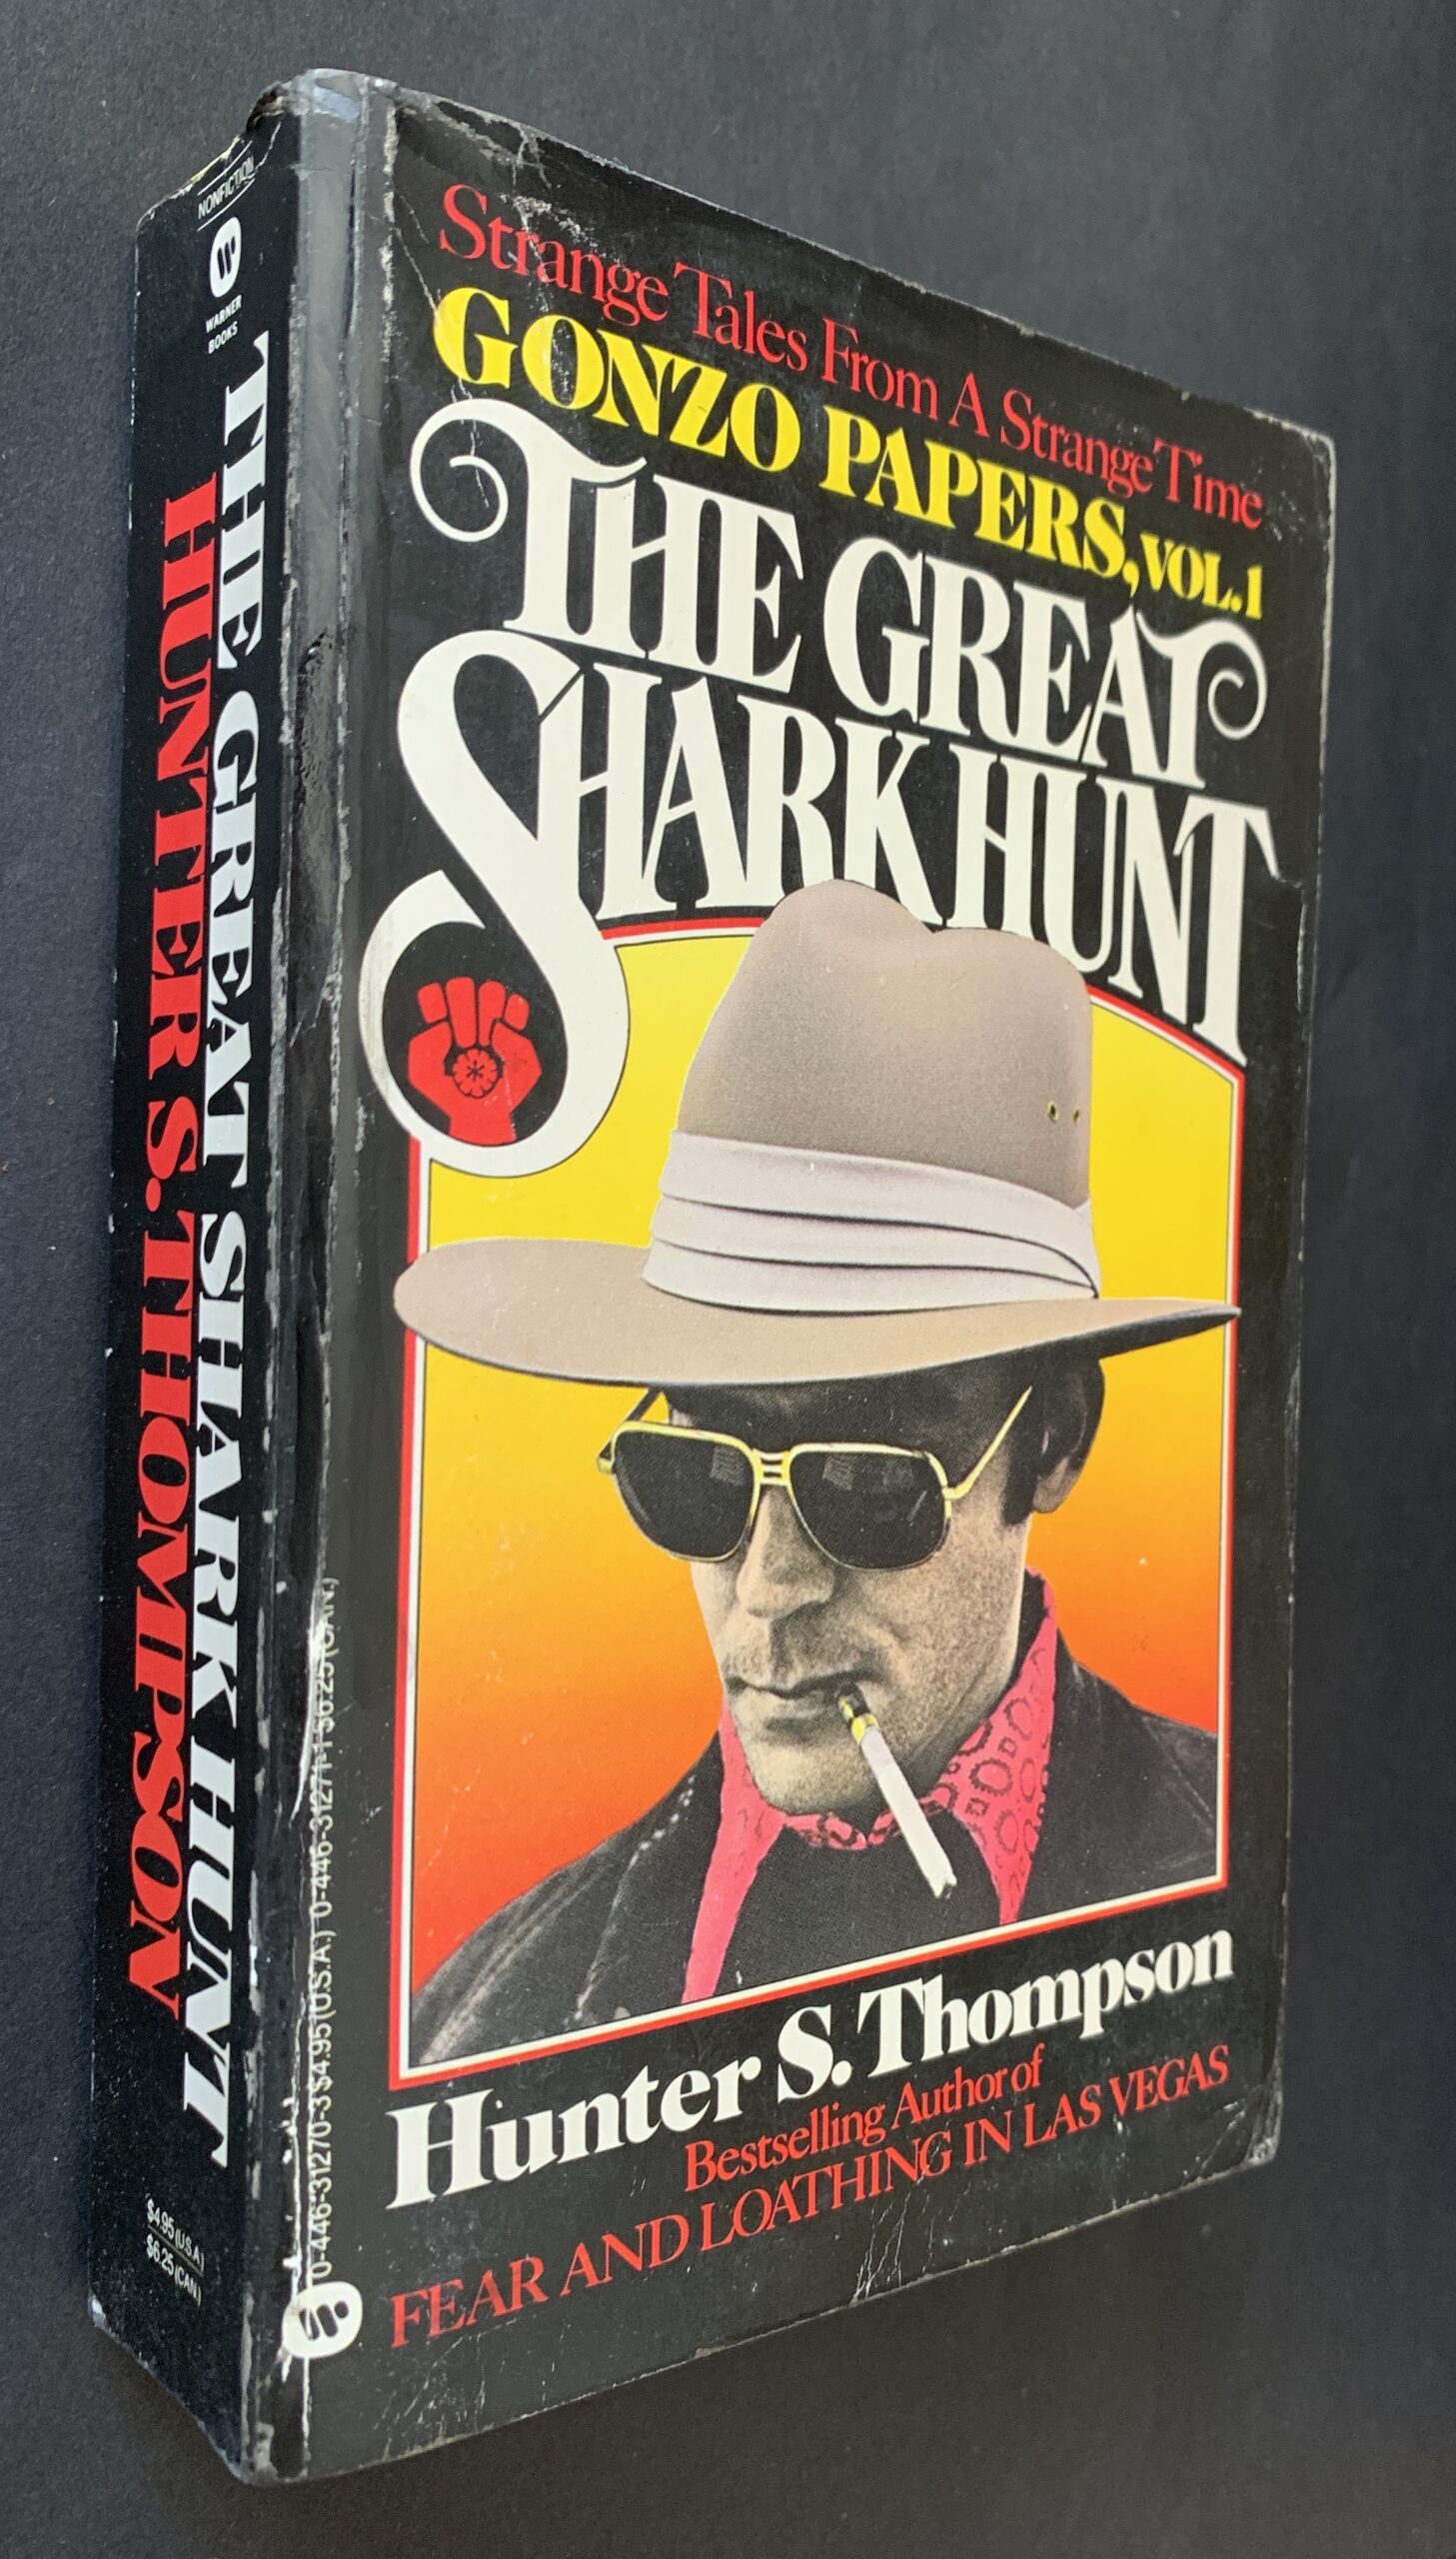 the great shark hunt review